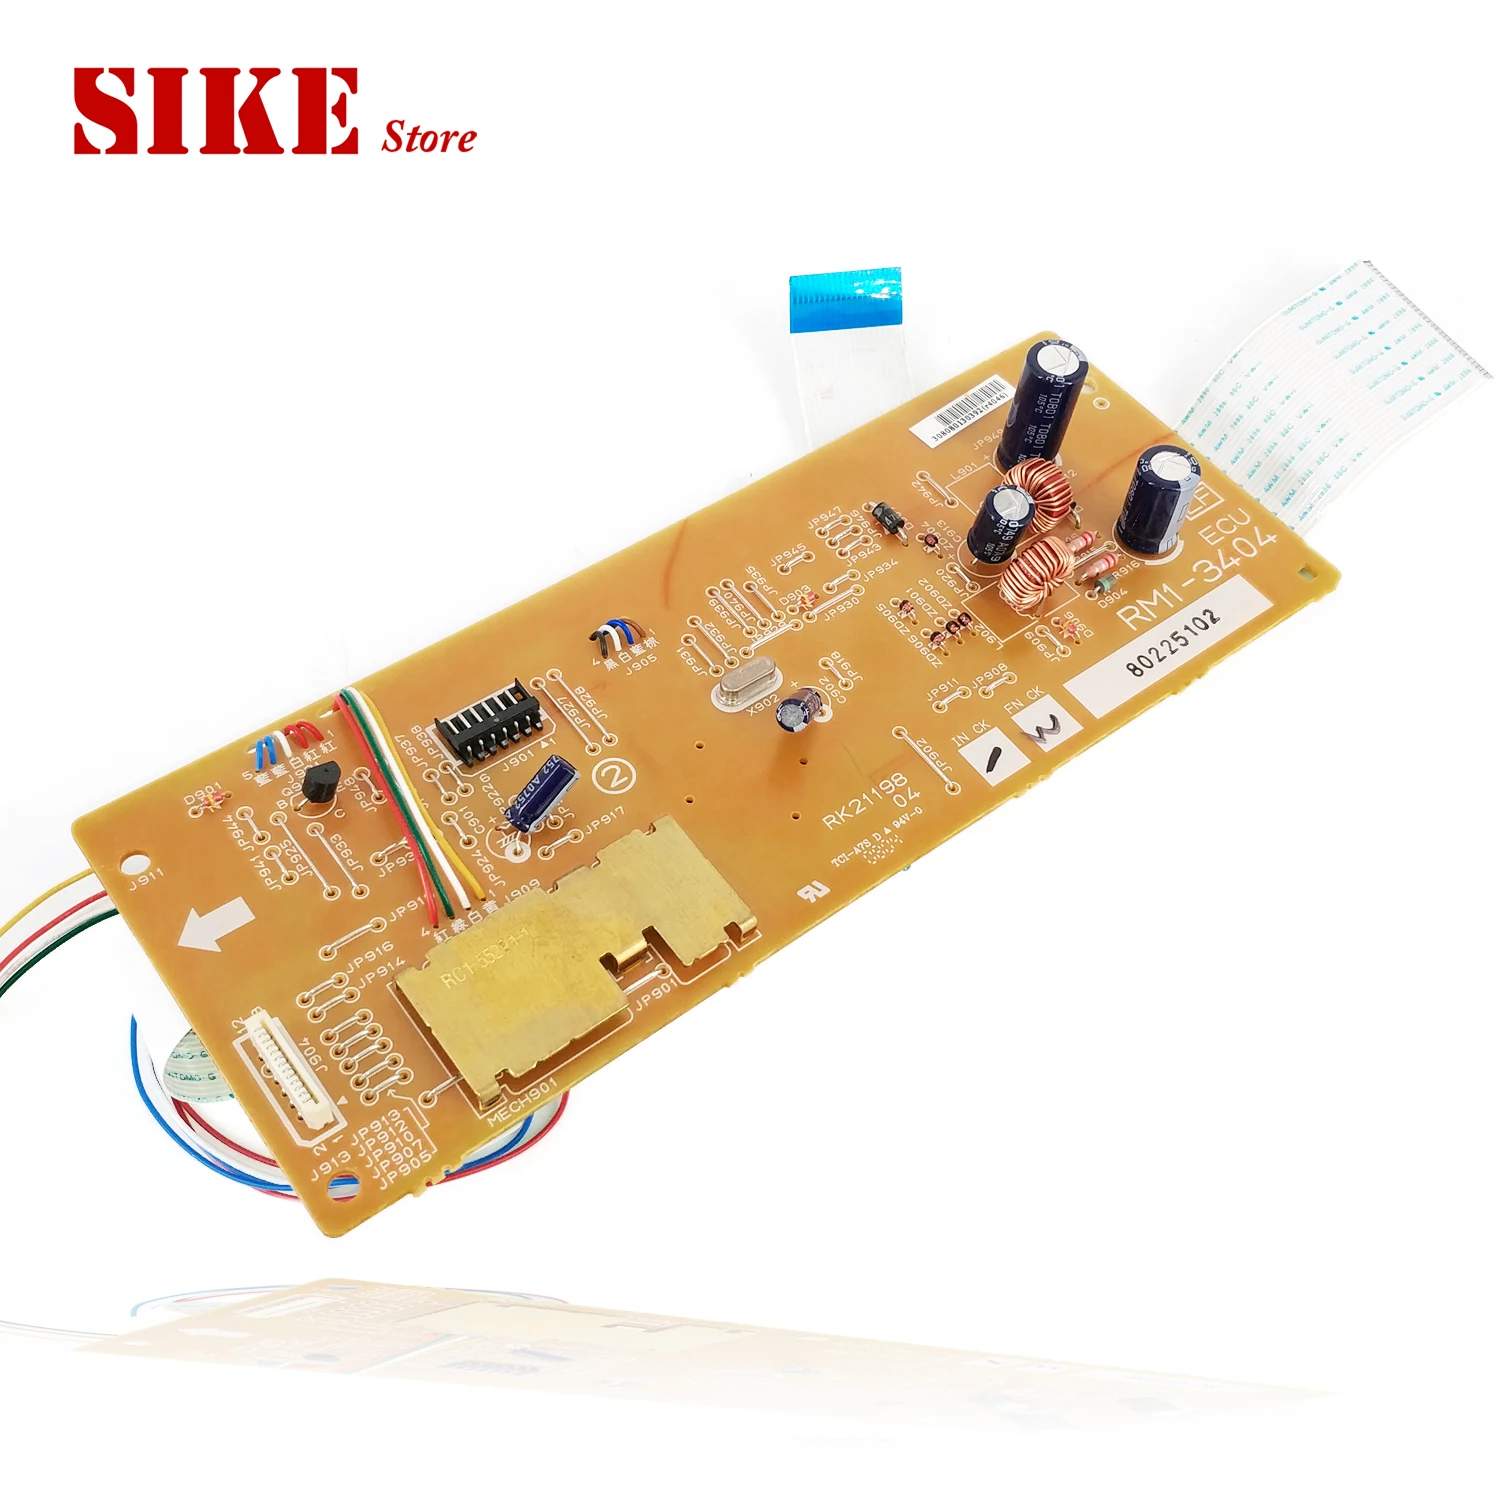 

RM1-3404 DC Control PC Board Use For HP 3050 3052 3055 M1319f M1319 1319 DC Controller Board